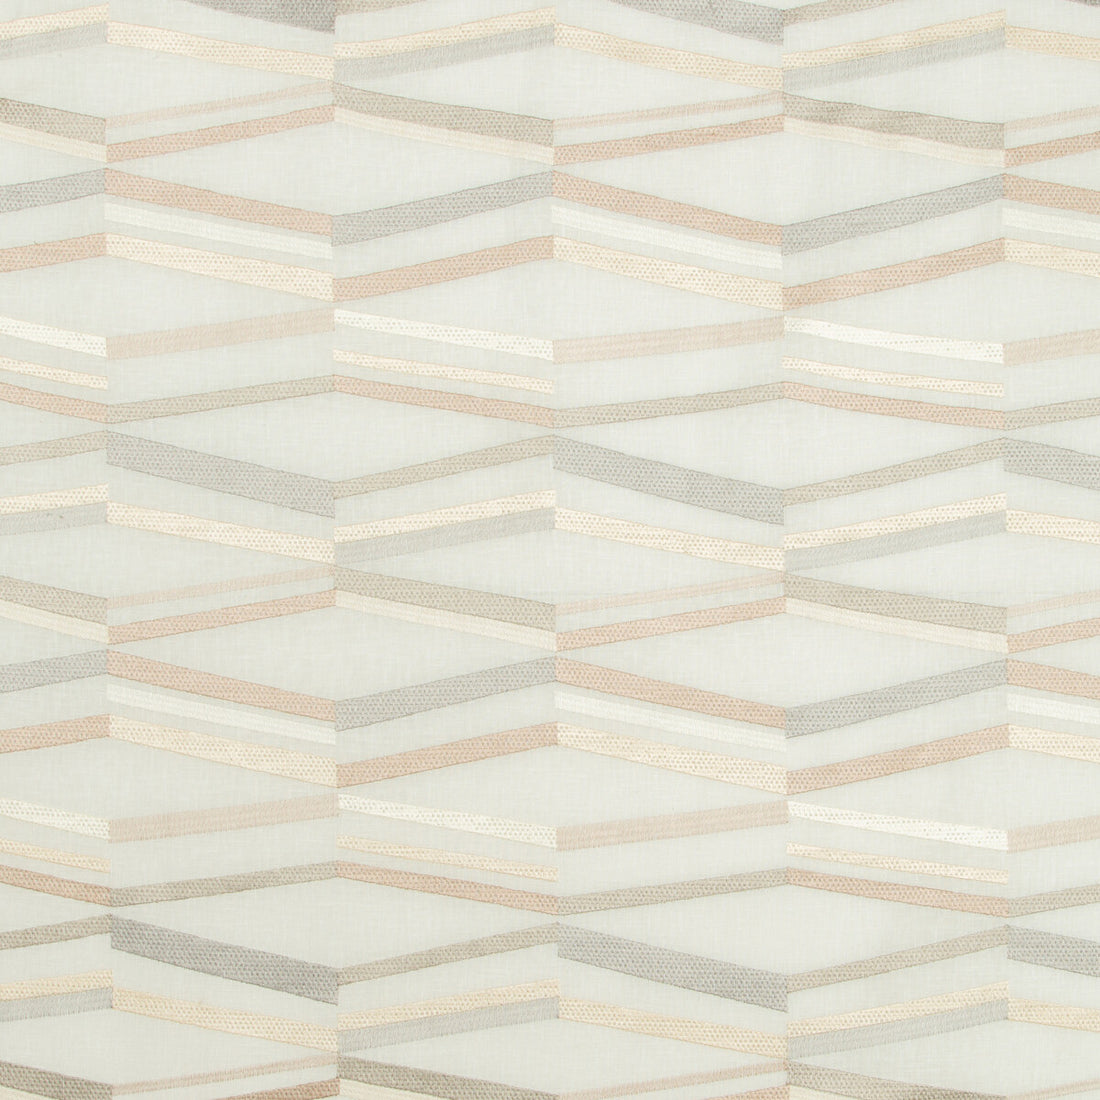 Parabola fabric in dove color - pattern 4248.1611.0 - by Kravet Couture in the Sue Firestone Malibu collection